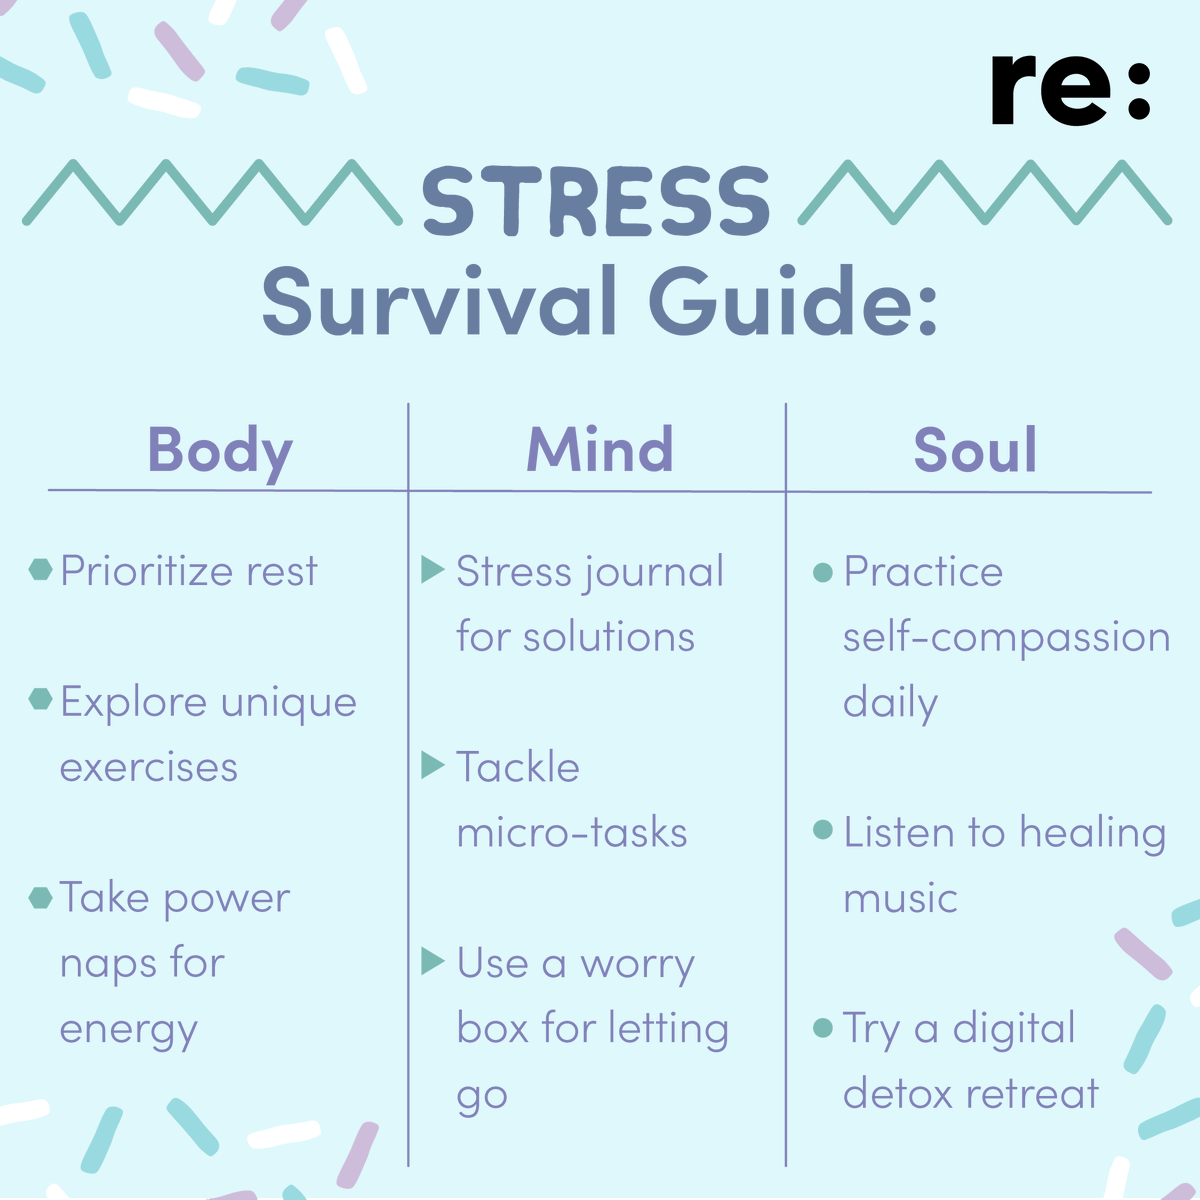 Taking stock of what you can and cannot control can do wonders to mitigate stress. Instead of getting trapped in vicious cycles of setting impossibly high standards, failing to reach them, practice a little de-stressing for your body, mind and soul every day.